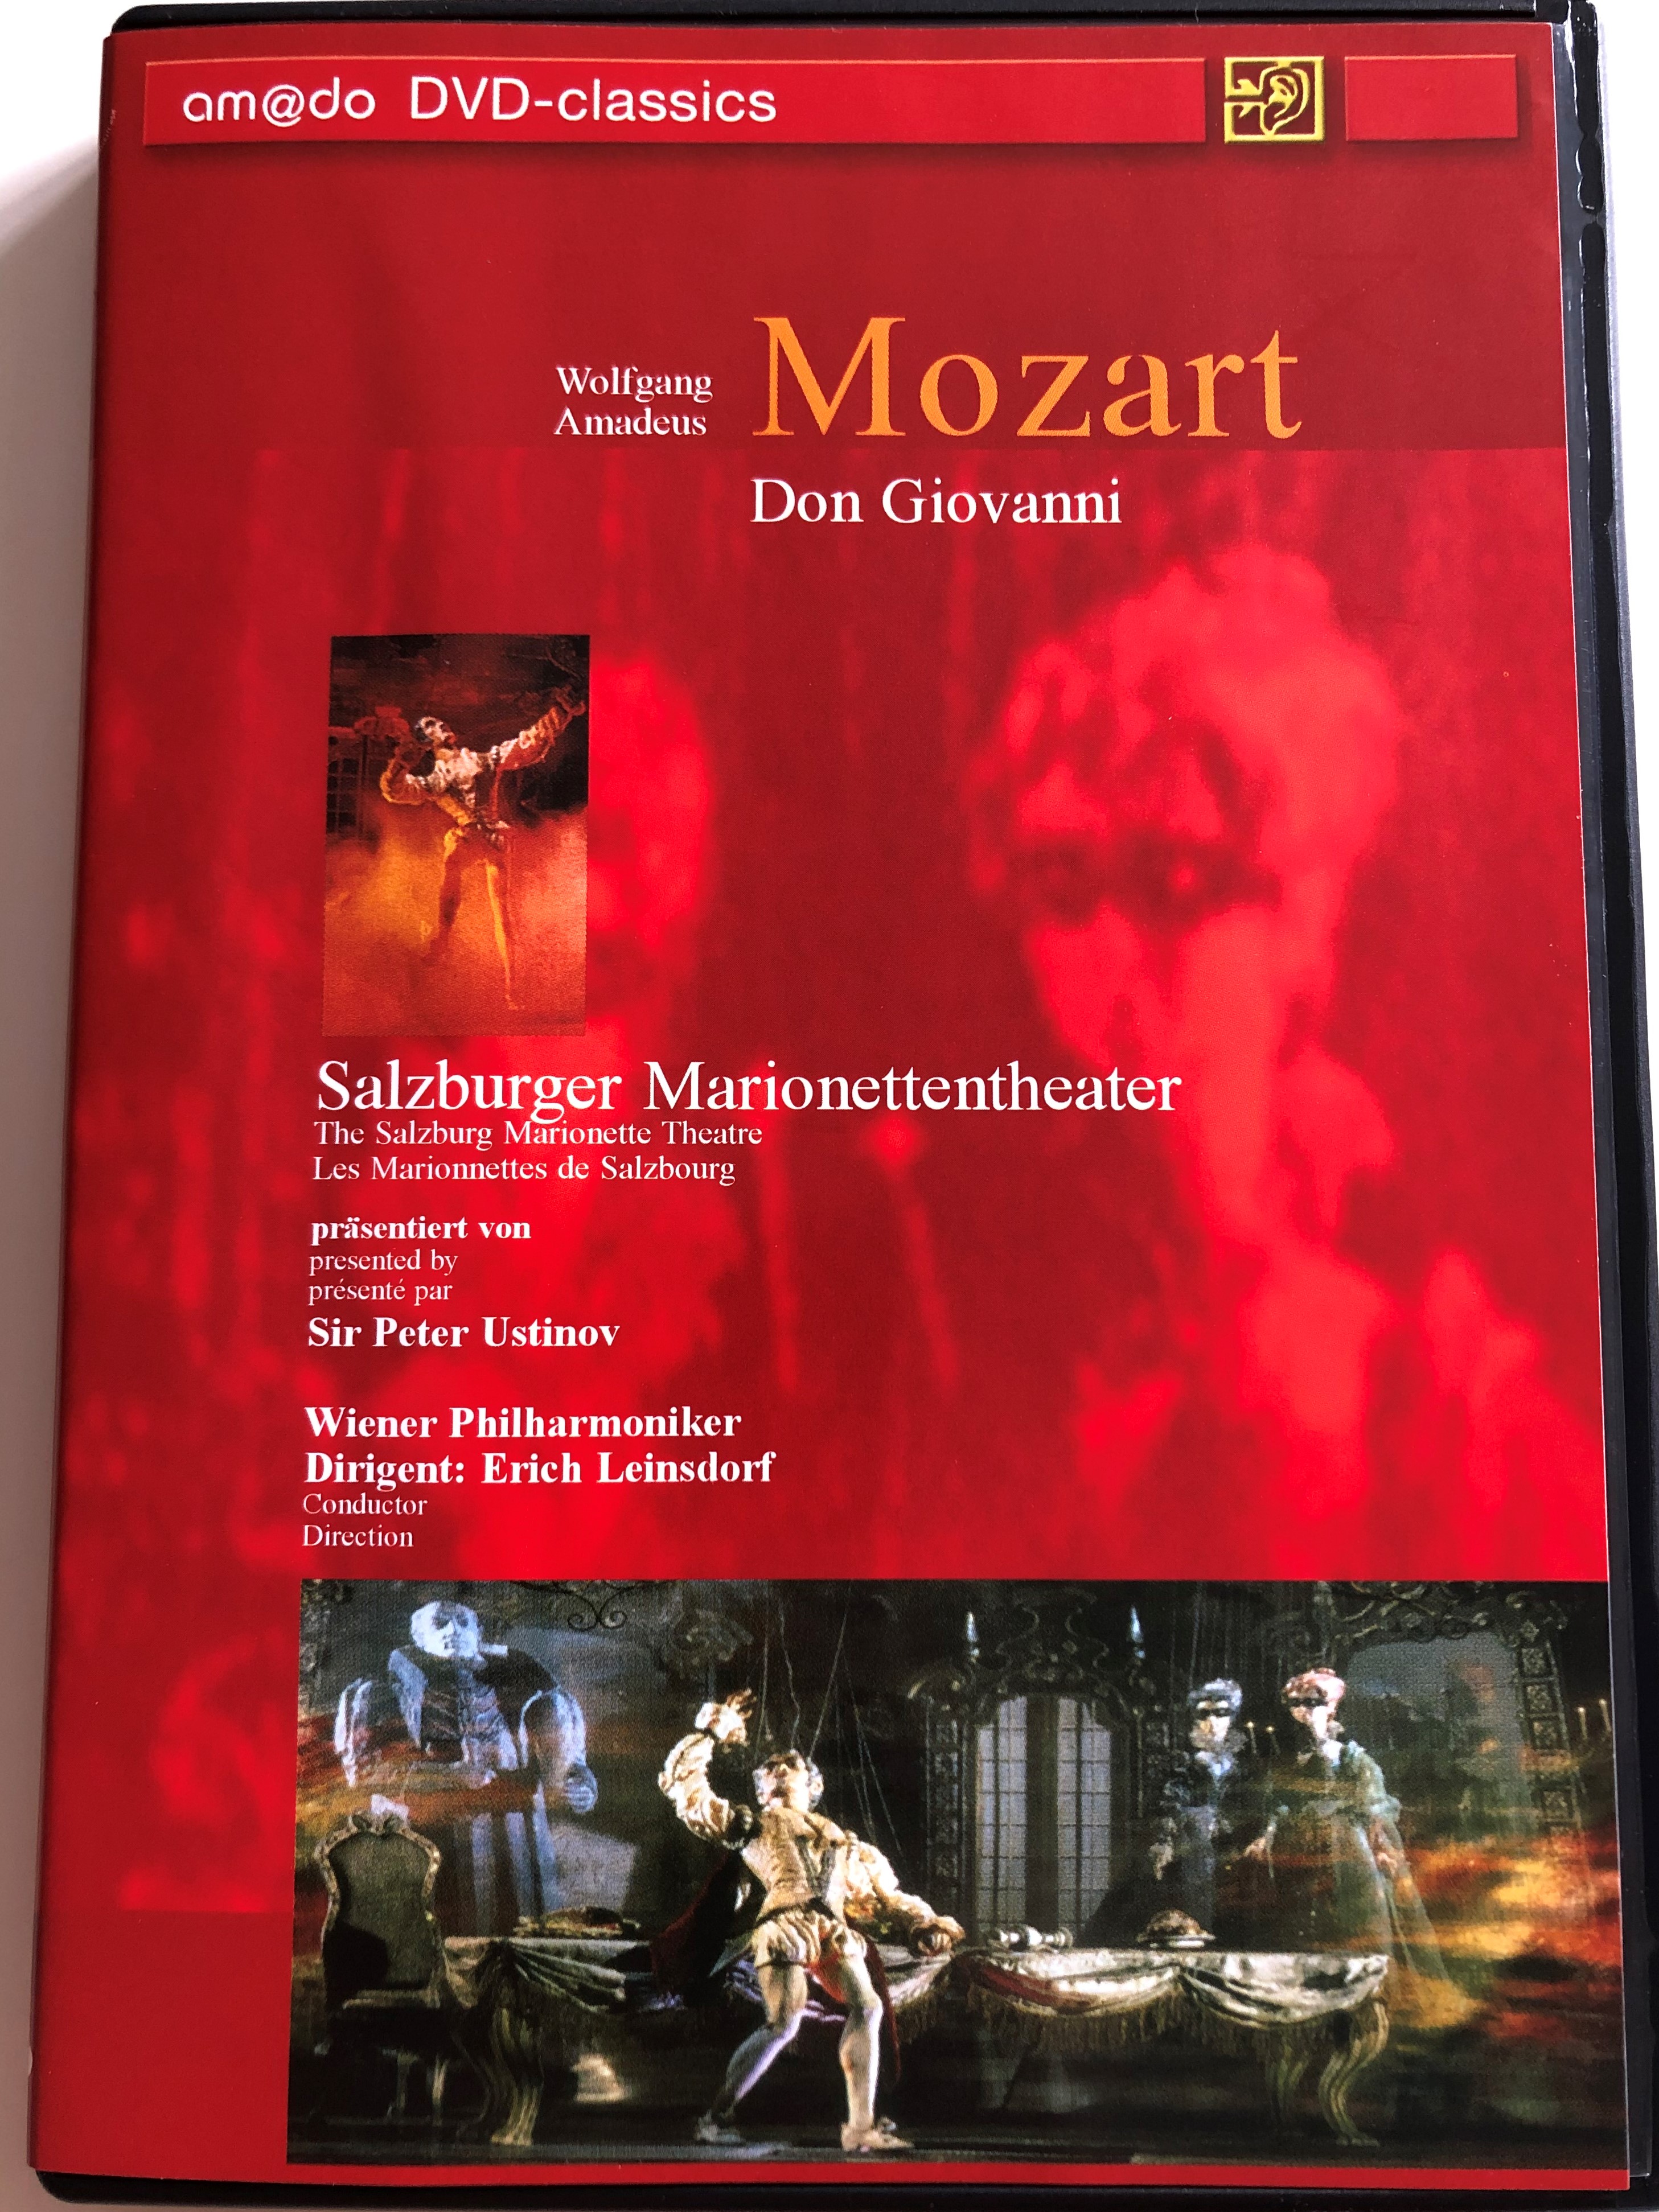 W.A. Mozart: Don Giovanni DVD 2003 / Directed by Georg Wübbolt / Text and  Narration by Sir Peter Ustinov / The Salzburg Marionette Theatre / Wiener  Philharmoniker / Conducted by Erich Leinsdorf - bibleinmylanguage